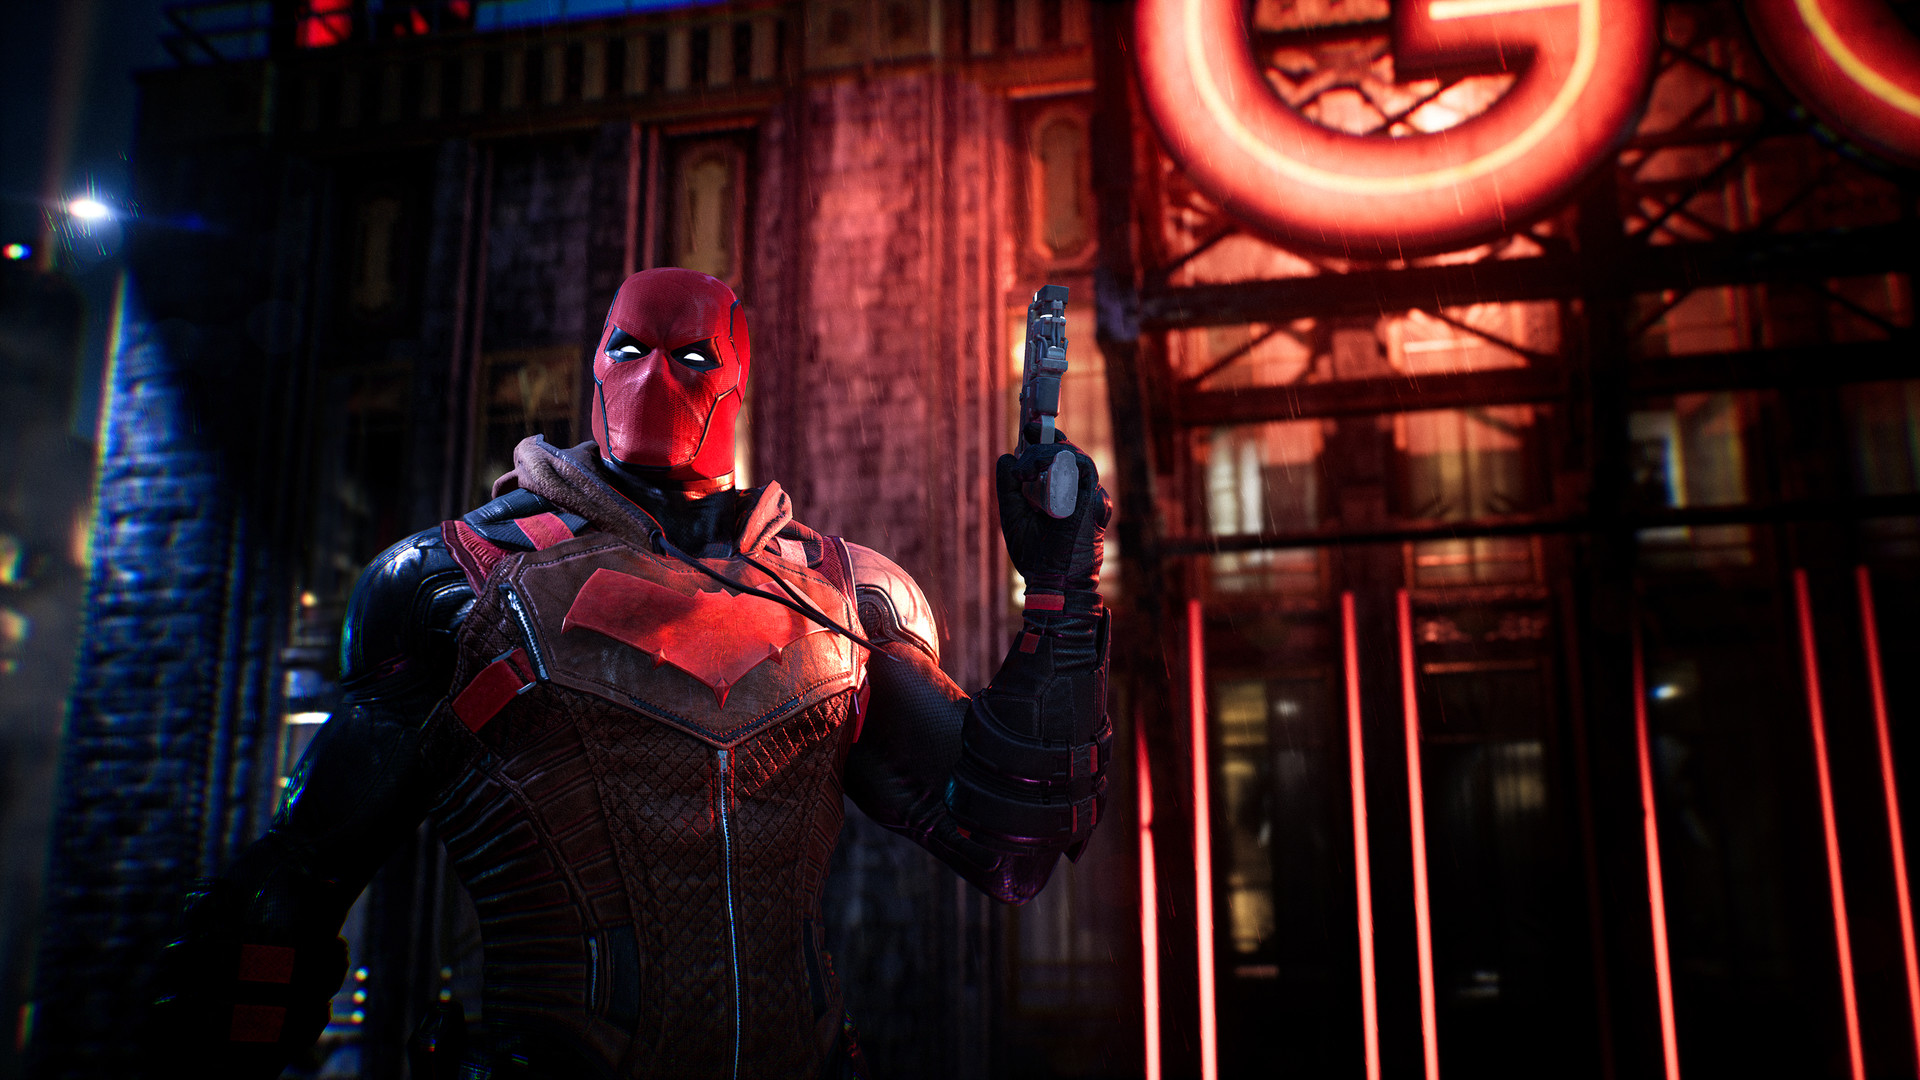 Gotham Knights review -- Arkham Knight at home